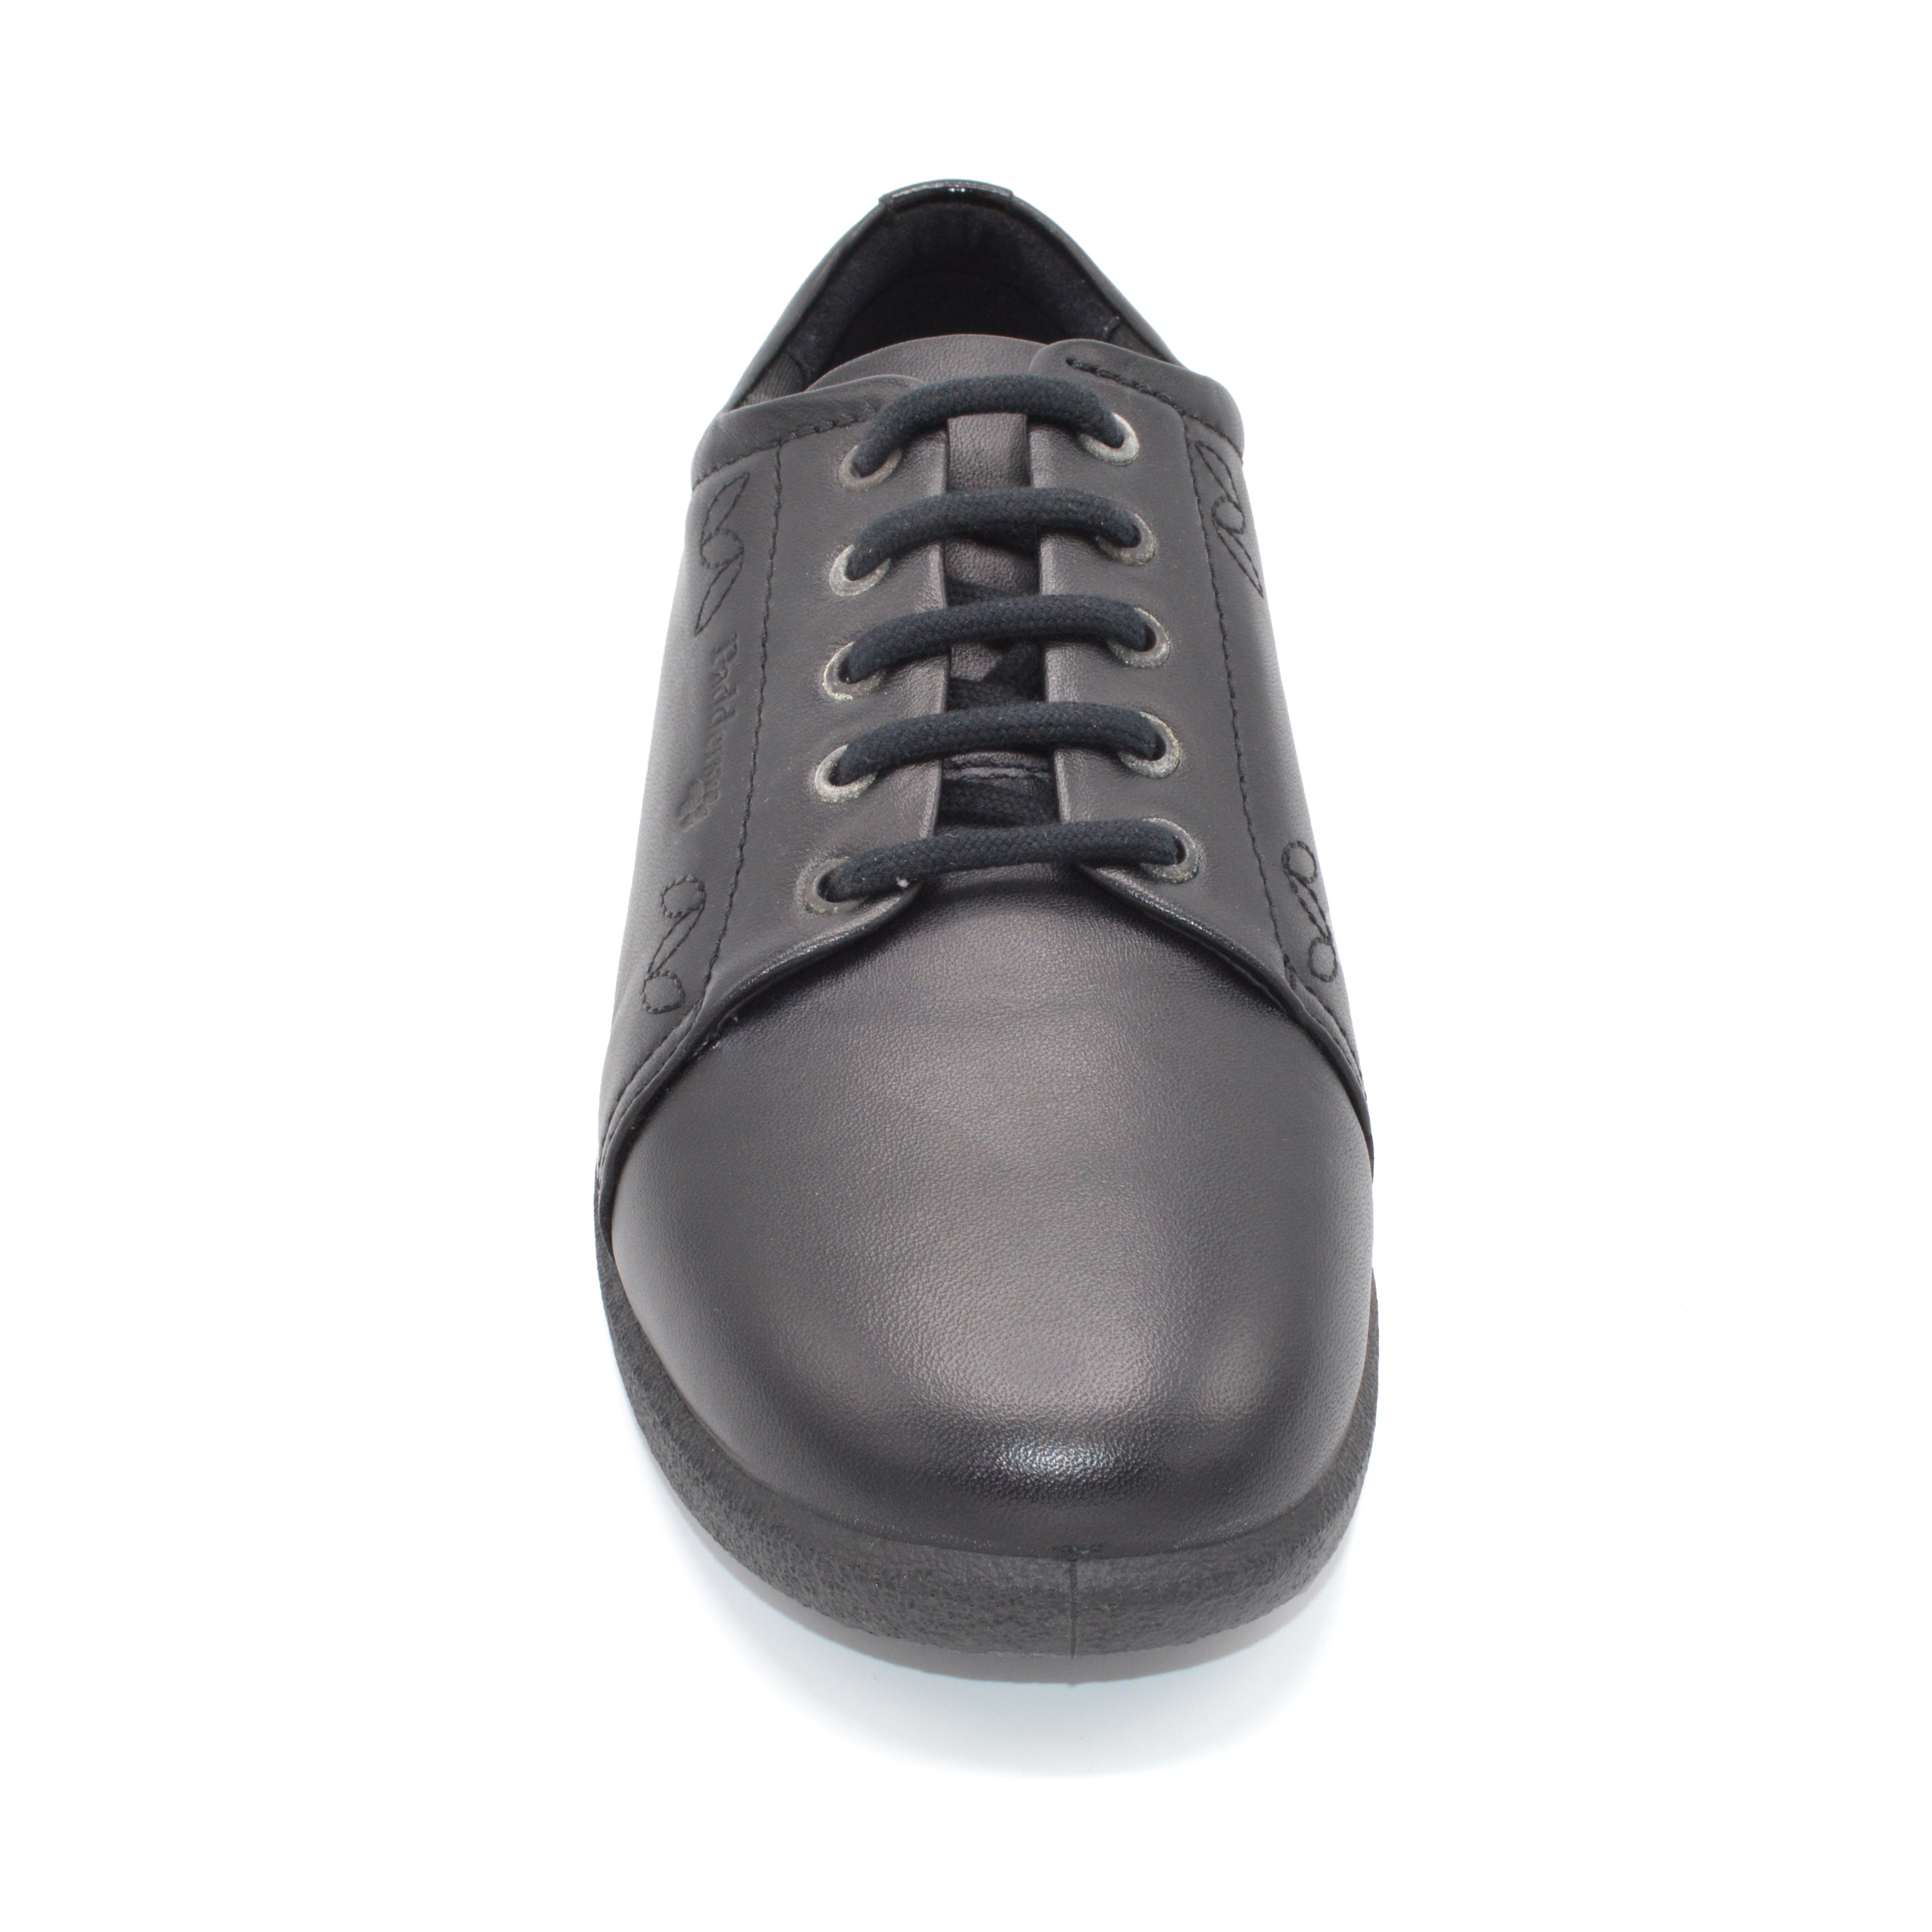 Comfortable Black Walking Shoe For Hammer Toes